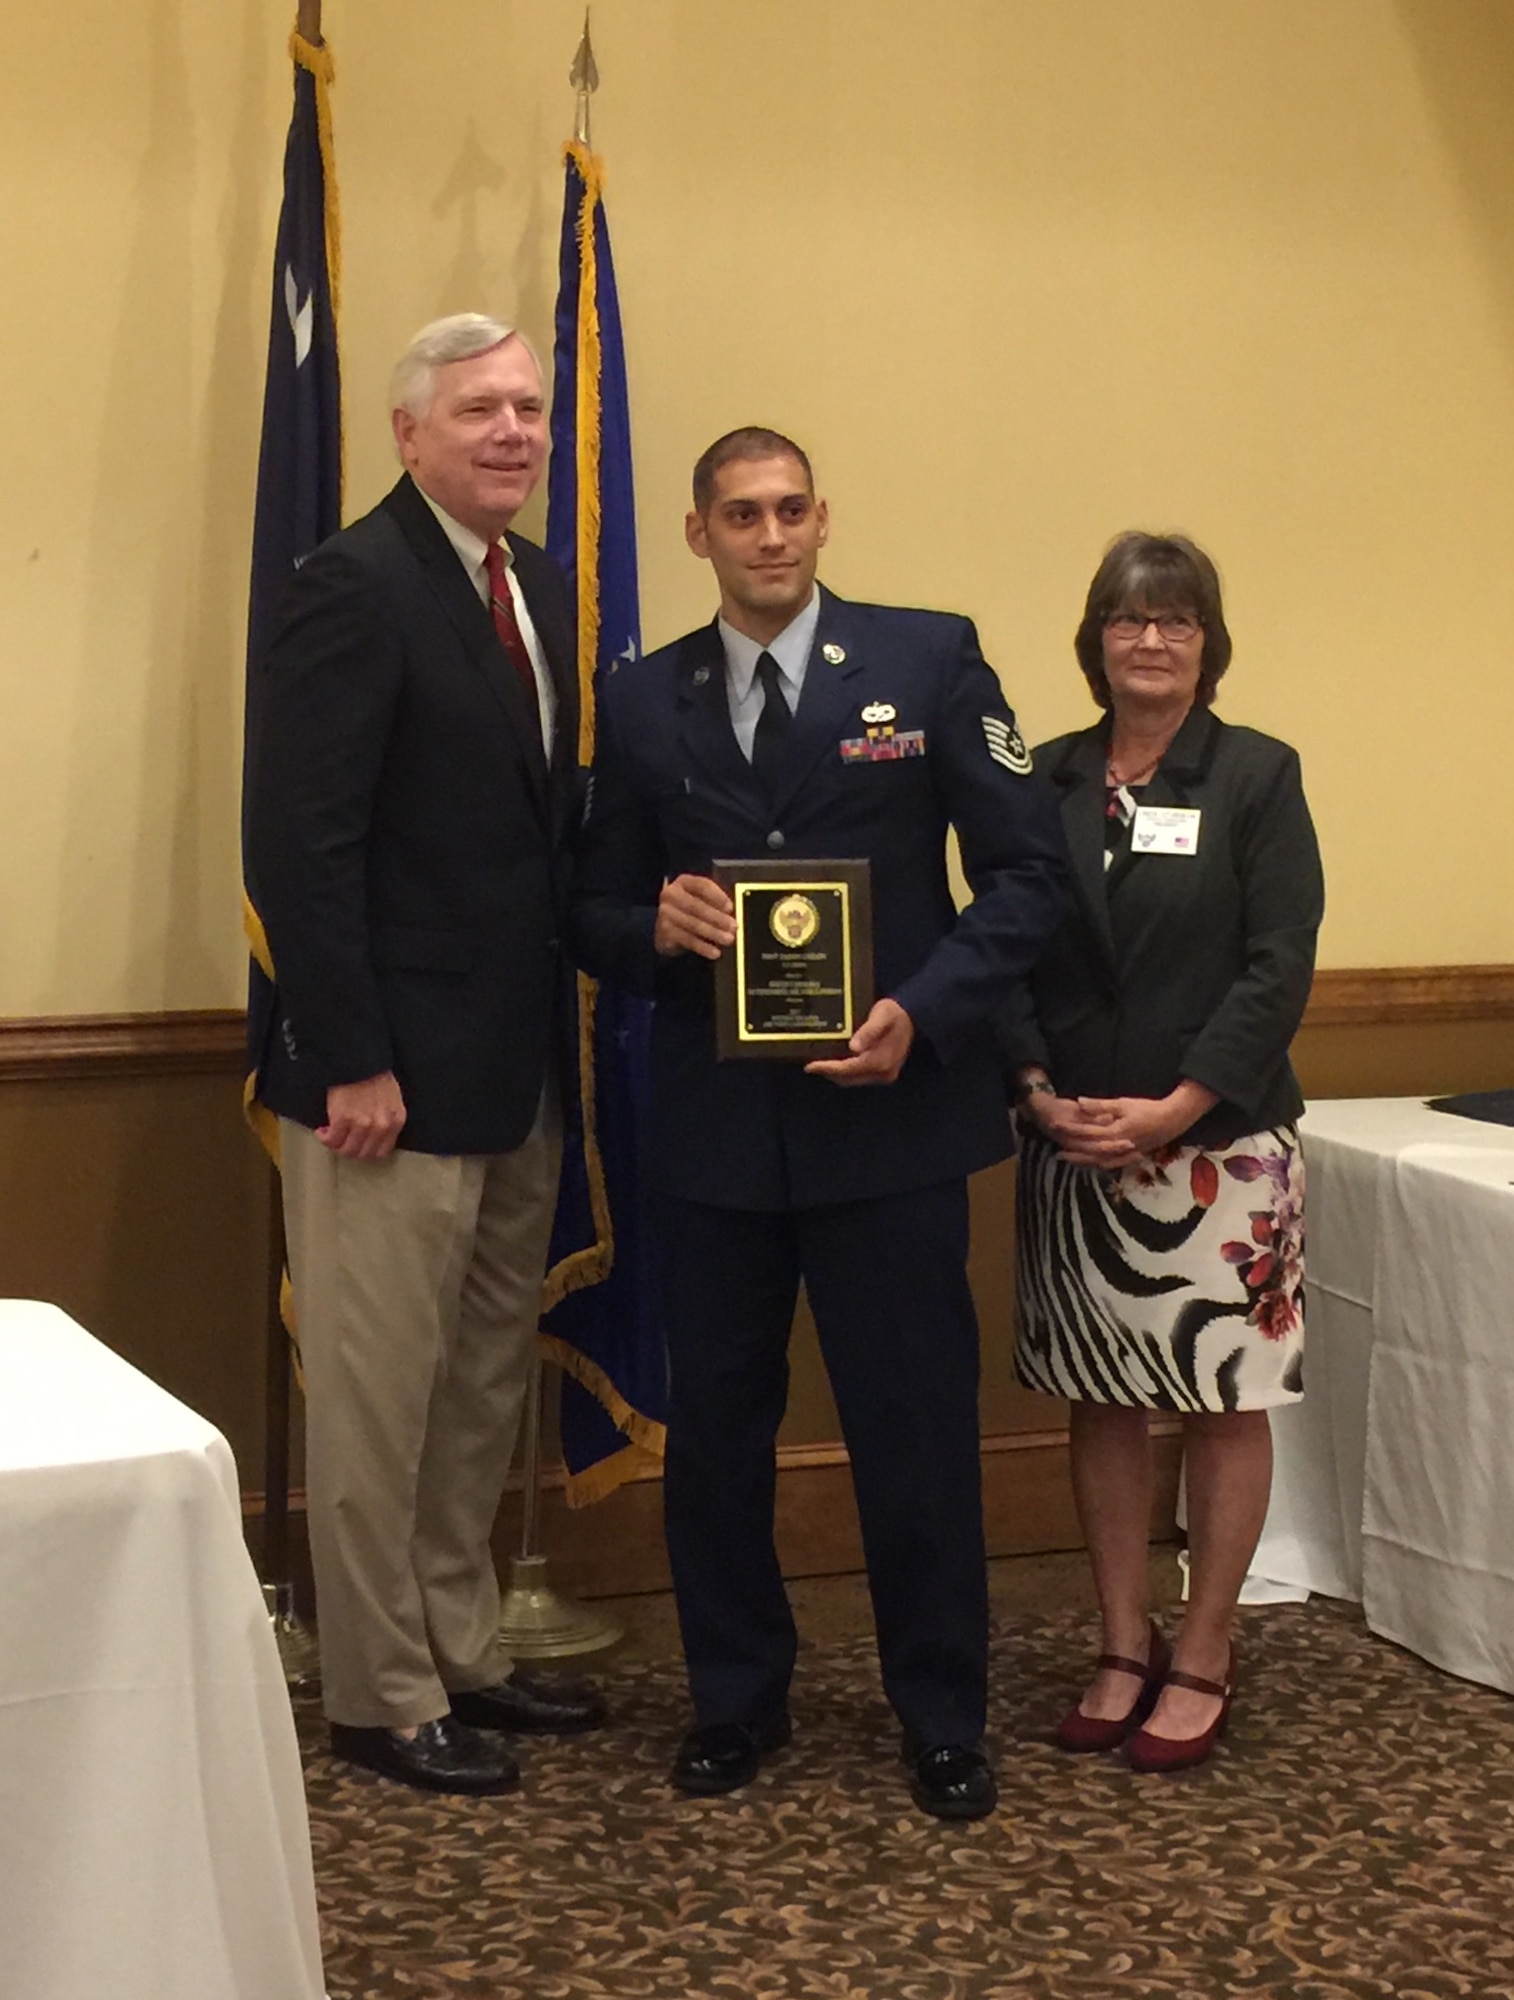 (From left) Retired Air Force Reserve Brig. Gen. Thomas Carter, AFA member and guest speaker for the Air Force Association South Carolina State Convention, Tech. Sgt. Jason Colon, 315th Aircraft Maintenance Squadron and AFA 2017 South Carolina Air Force Person of the Year,  and retired Senior Master Sgt. Linda Sturgeon, SC AFA State president.  (Courtesy photo)